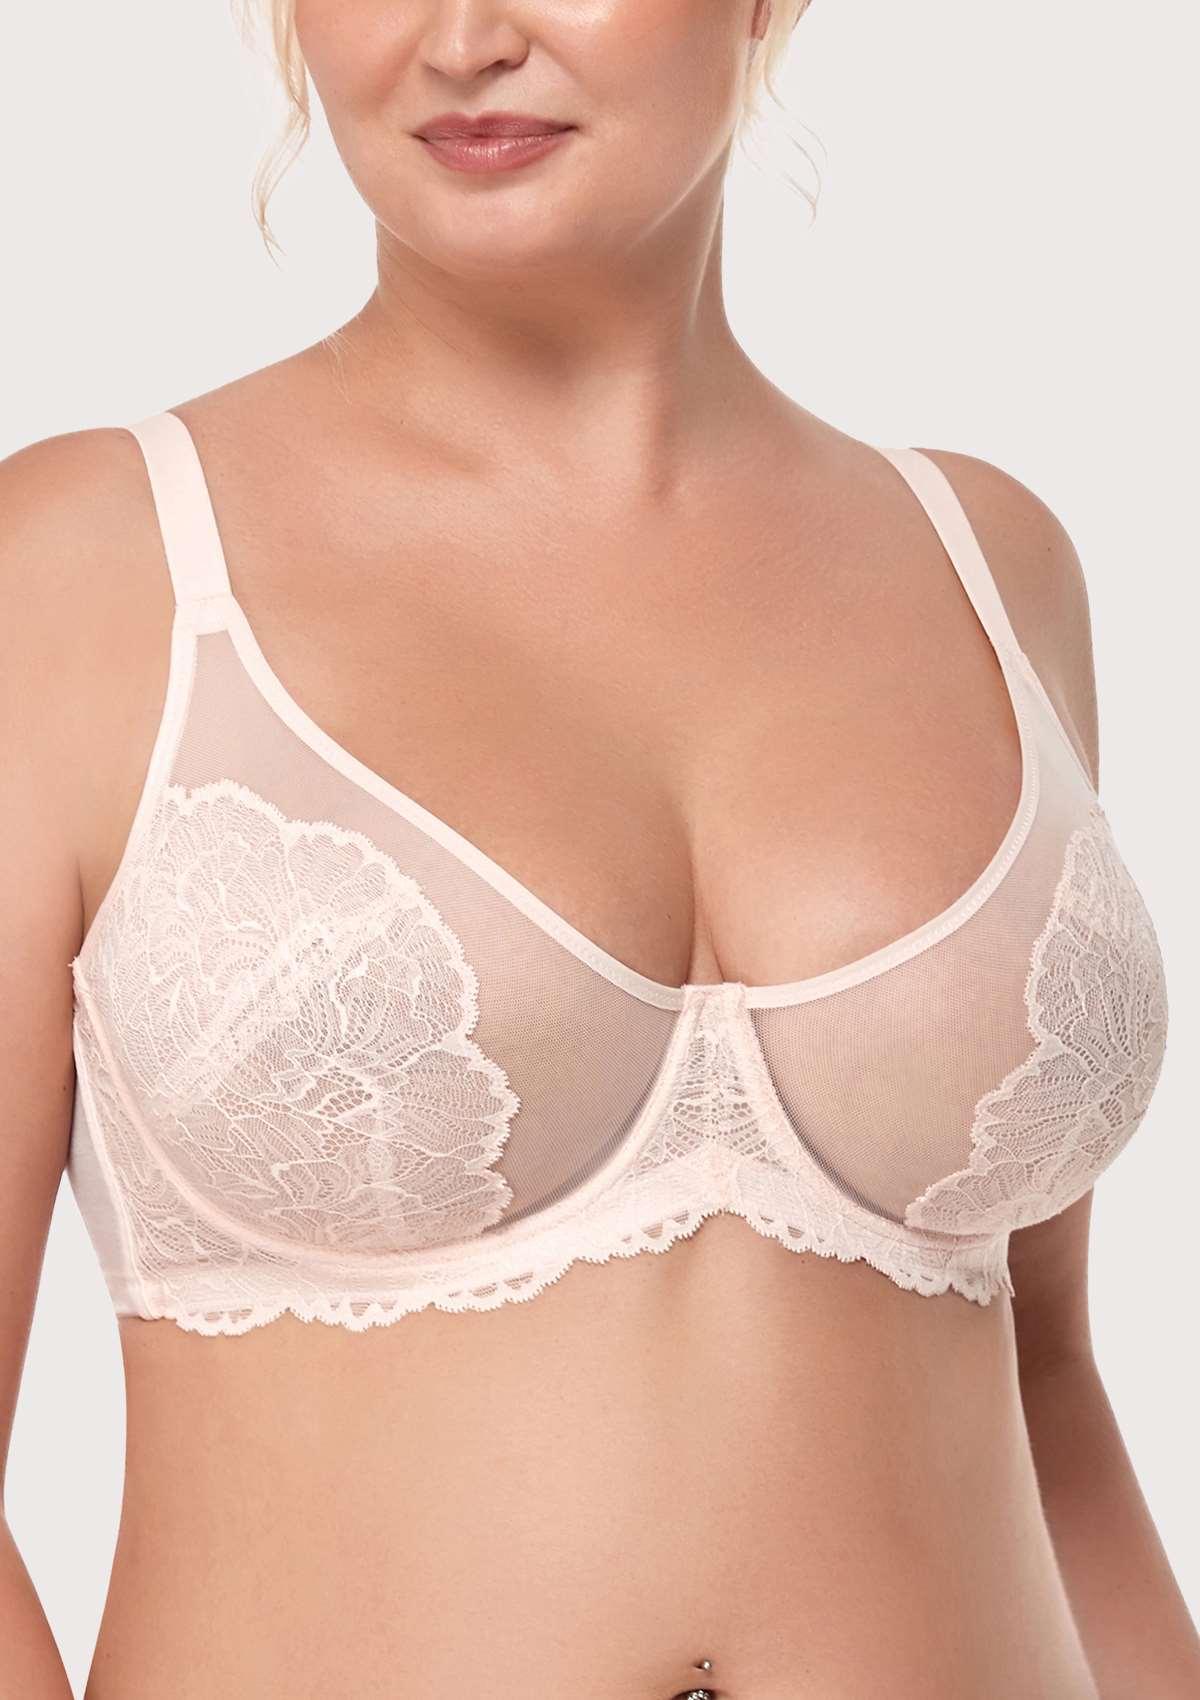 HSIA Blossom Matching Lacey Underwear And Bra Set: Sexy Lace Bra - Dusty Peach / 38 / H